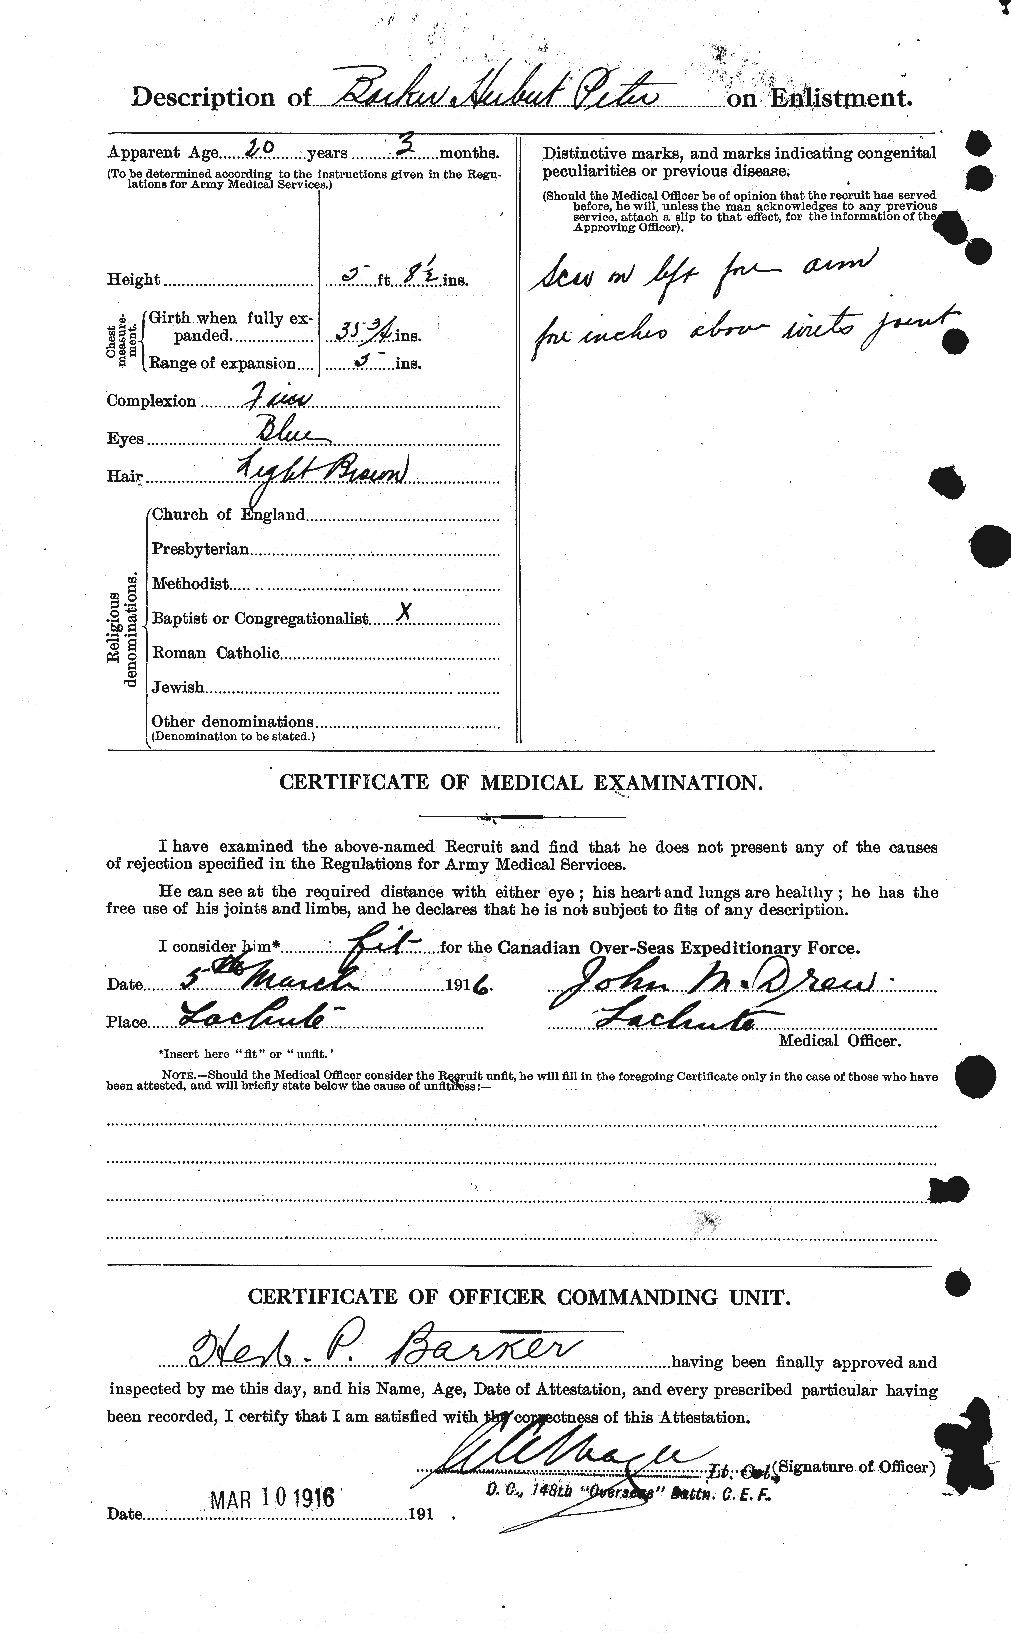 Personnel Records of the First World War - CEF 227495b